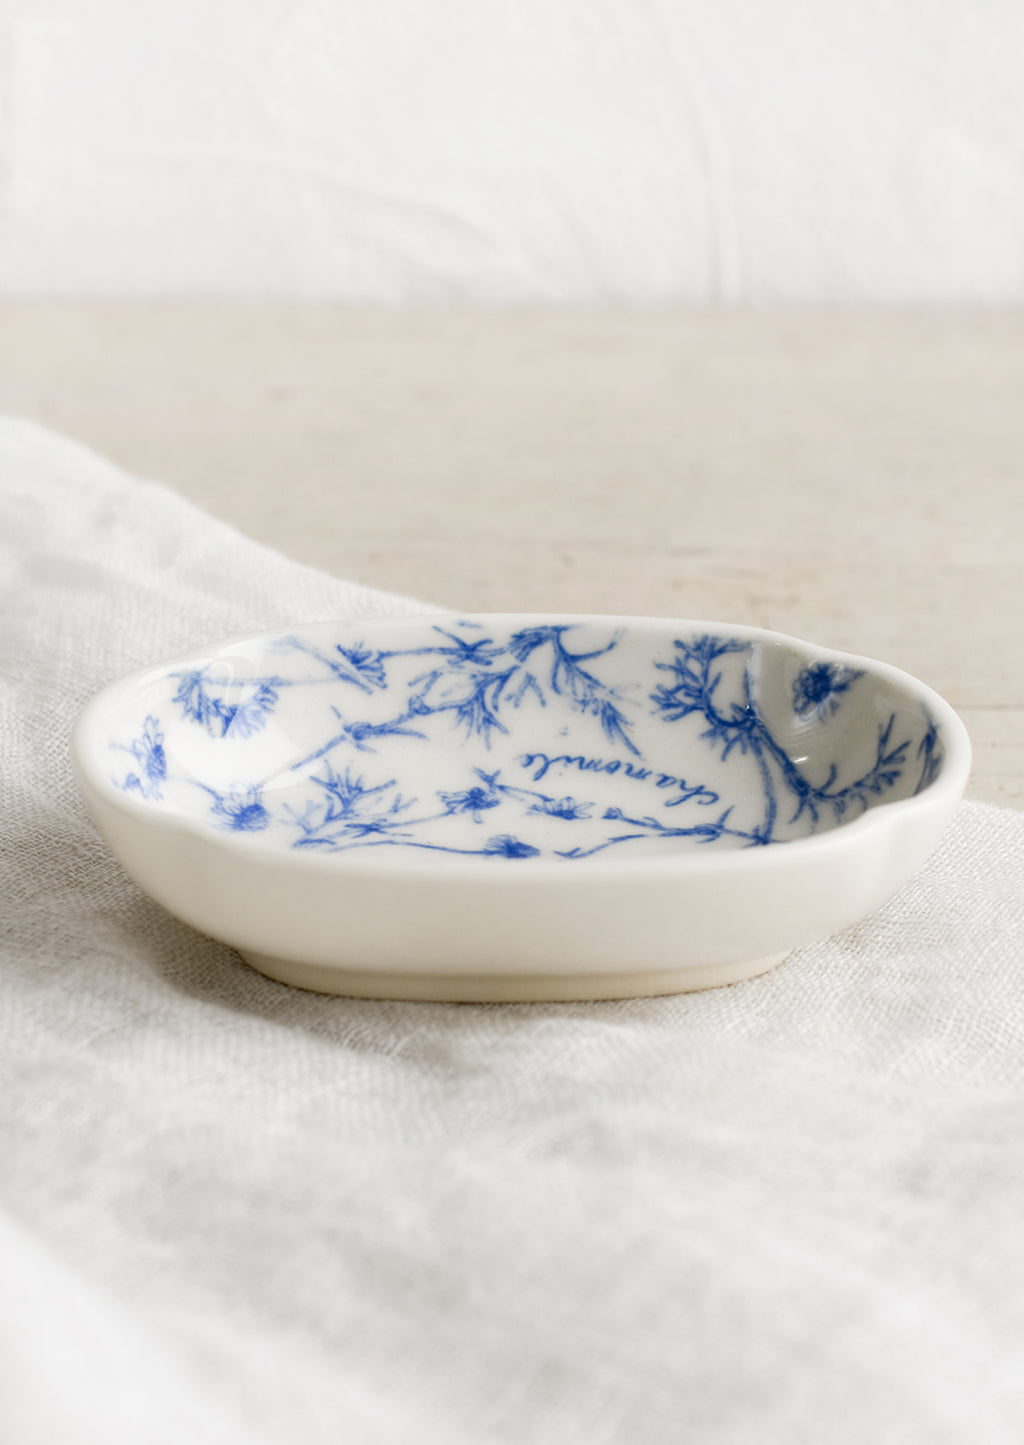 2: A small oval shaped dish in white with blue floral pattern.